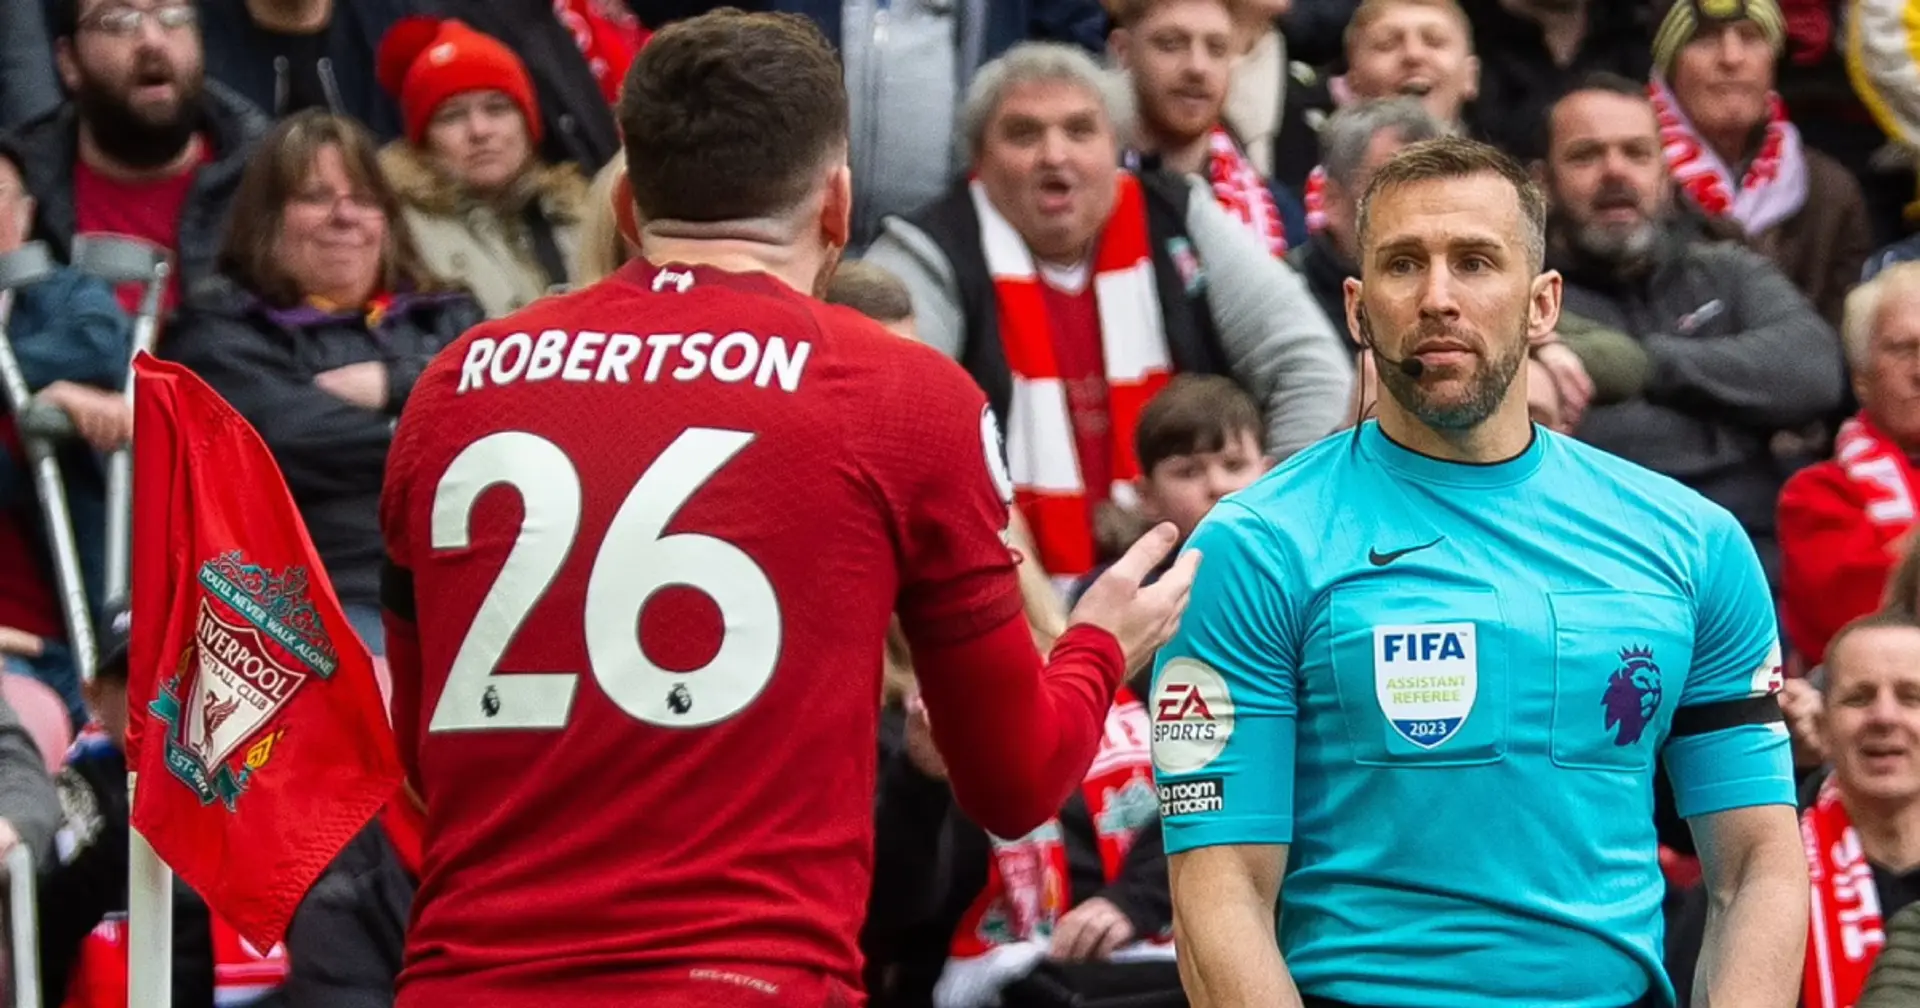 Assistant referee opens up on elbowing Robertson and 3 more under-radar stories today